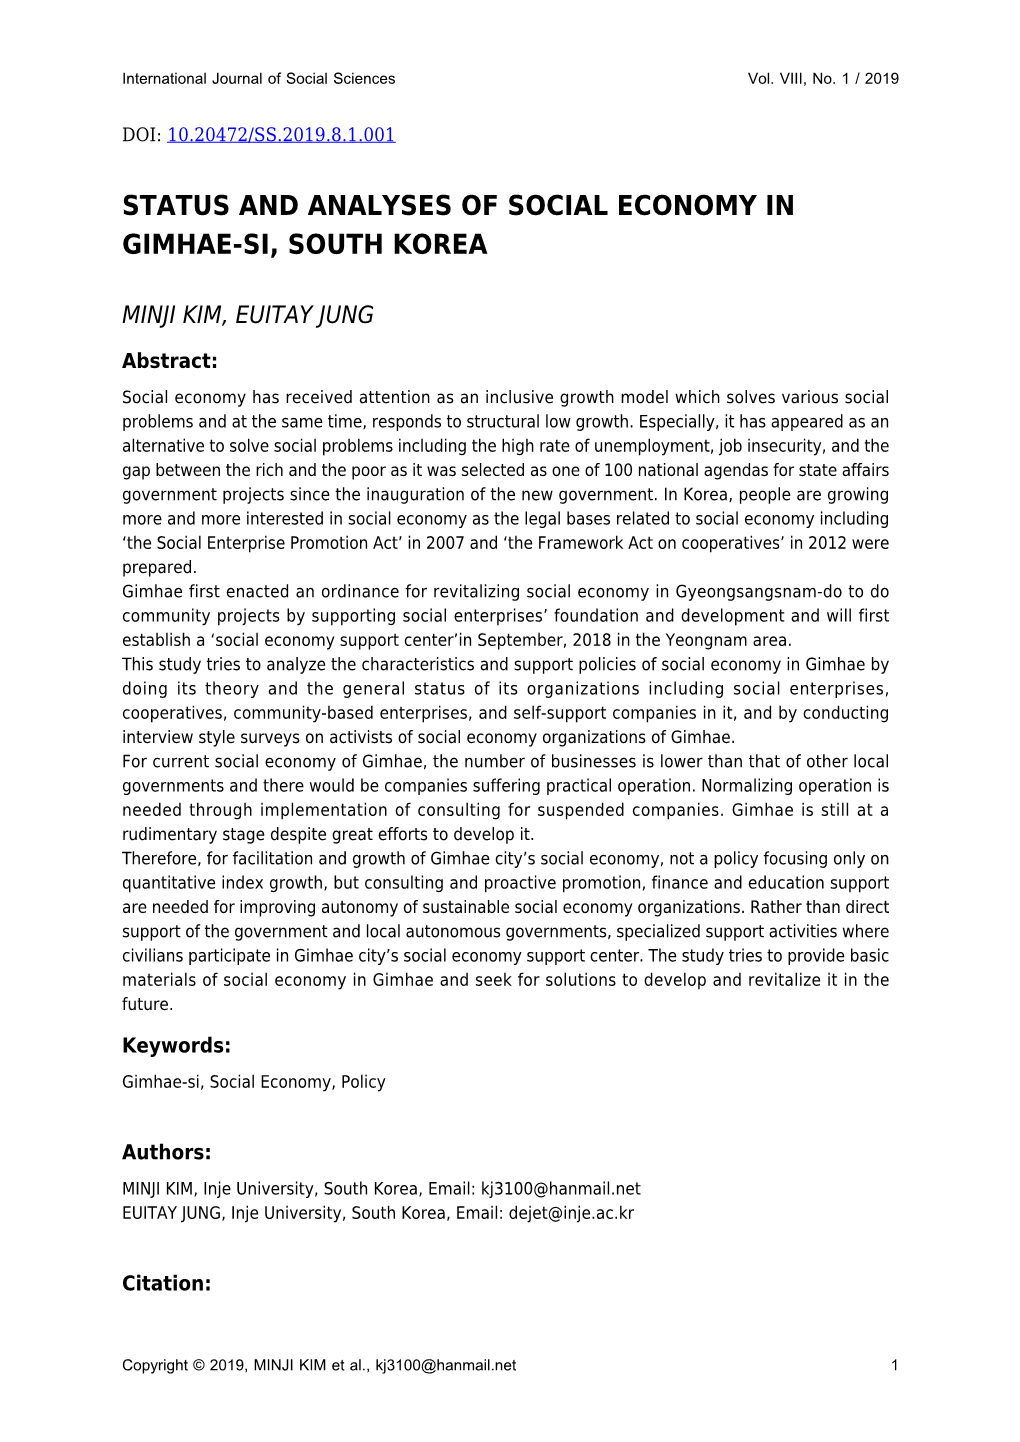 Status and Analyses of Social Economy in Gimhae-Si, South Korea